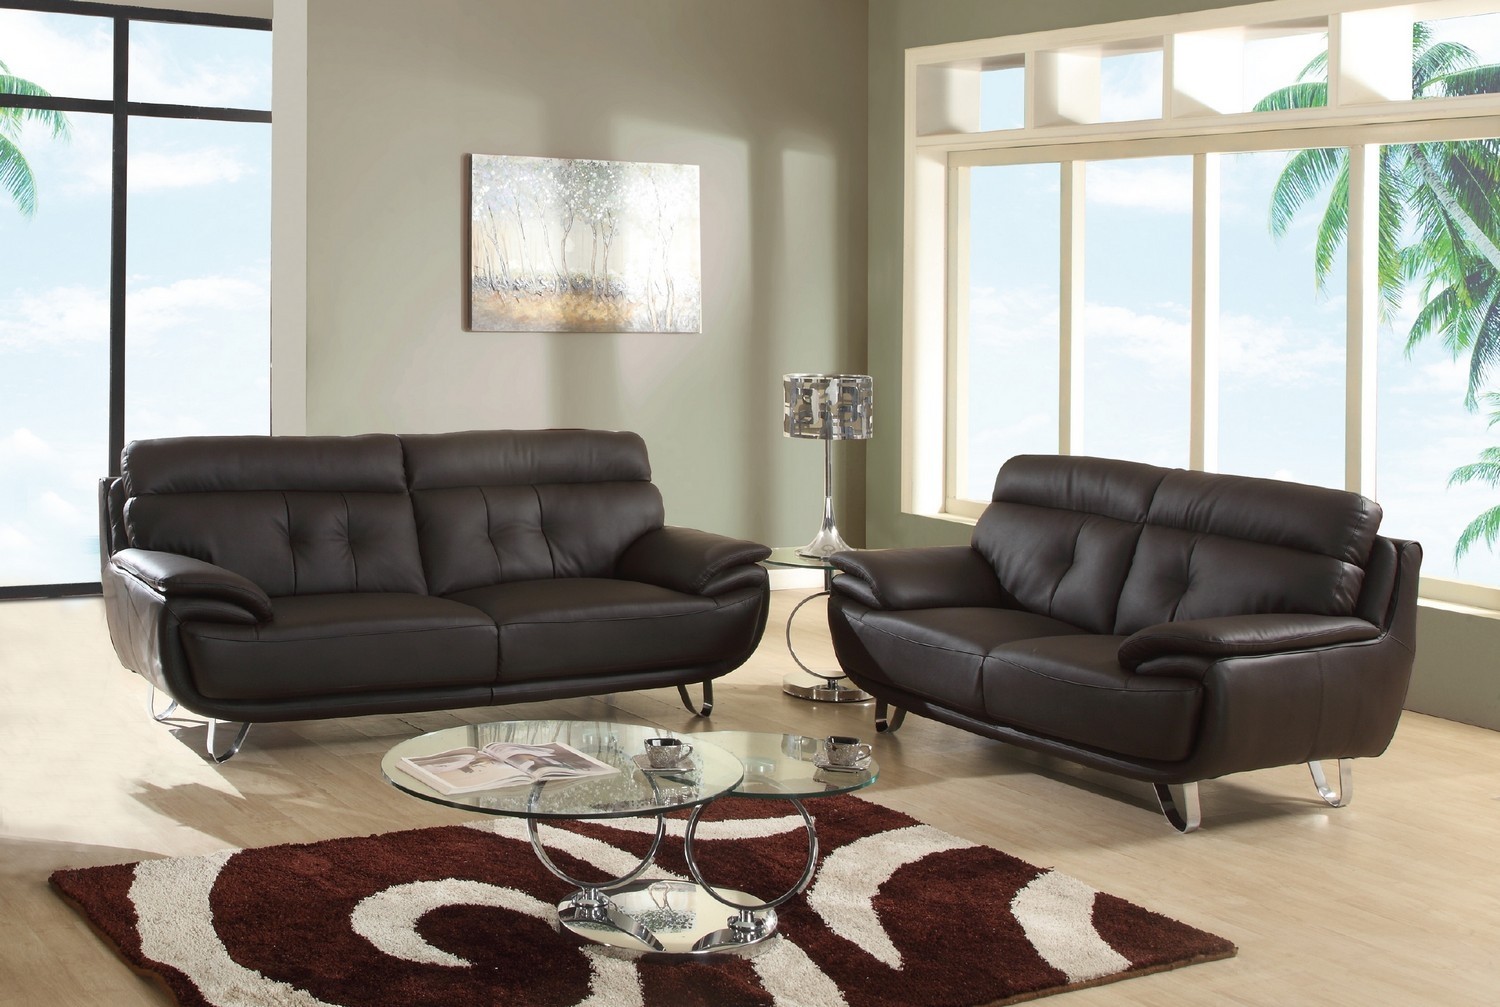 69 X 38 X 48 Modern Brown Leather Sofa And Loveseat